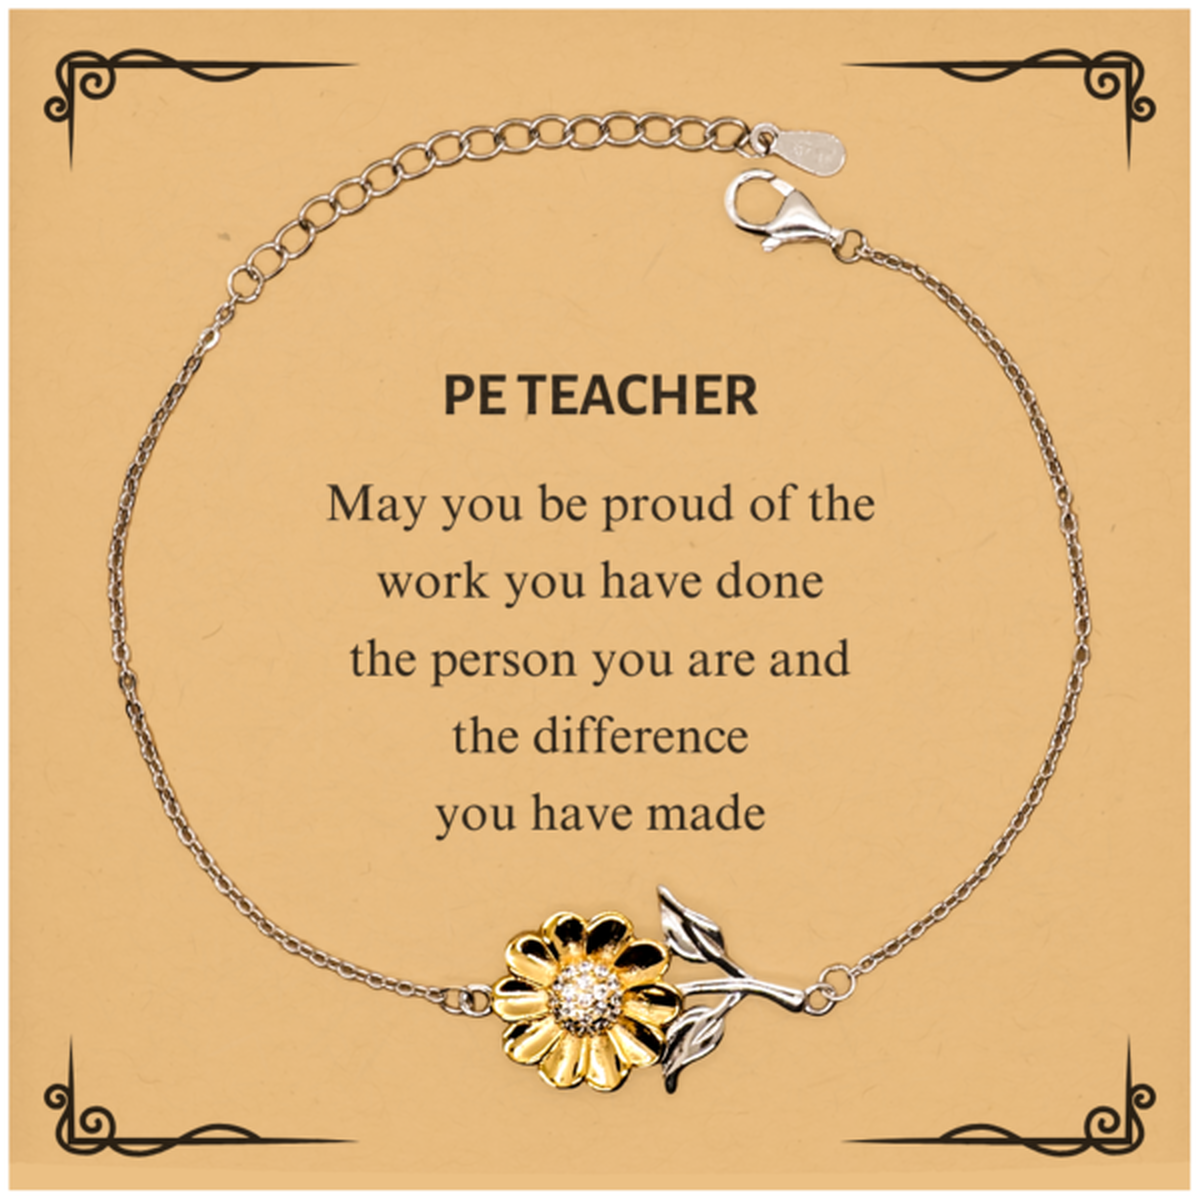 PE Teacher May you be proud of the work you have done, Retirement PE Teacher Sunflower Bracelet for Colleague Appreciation Gifts Amazing for PE Teacher